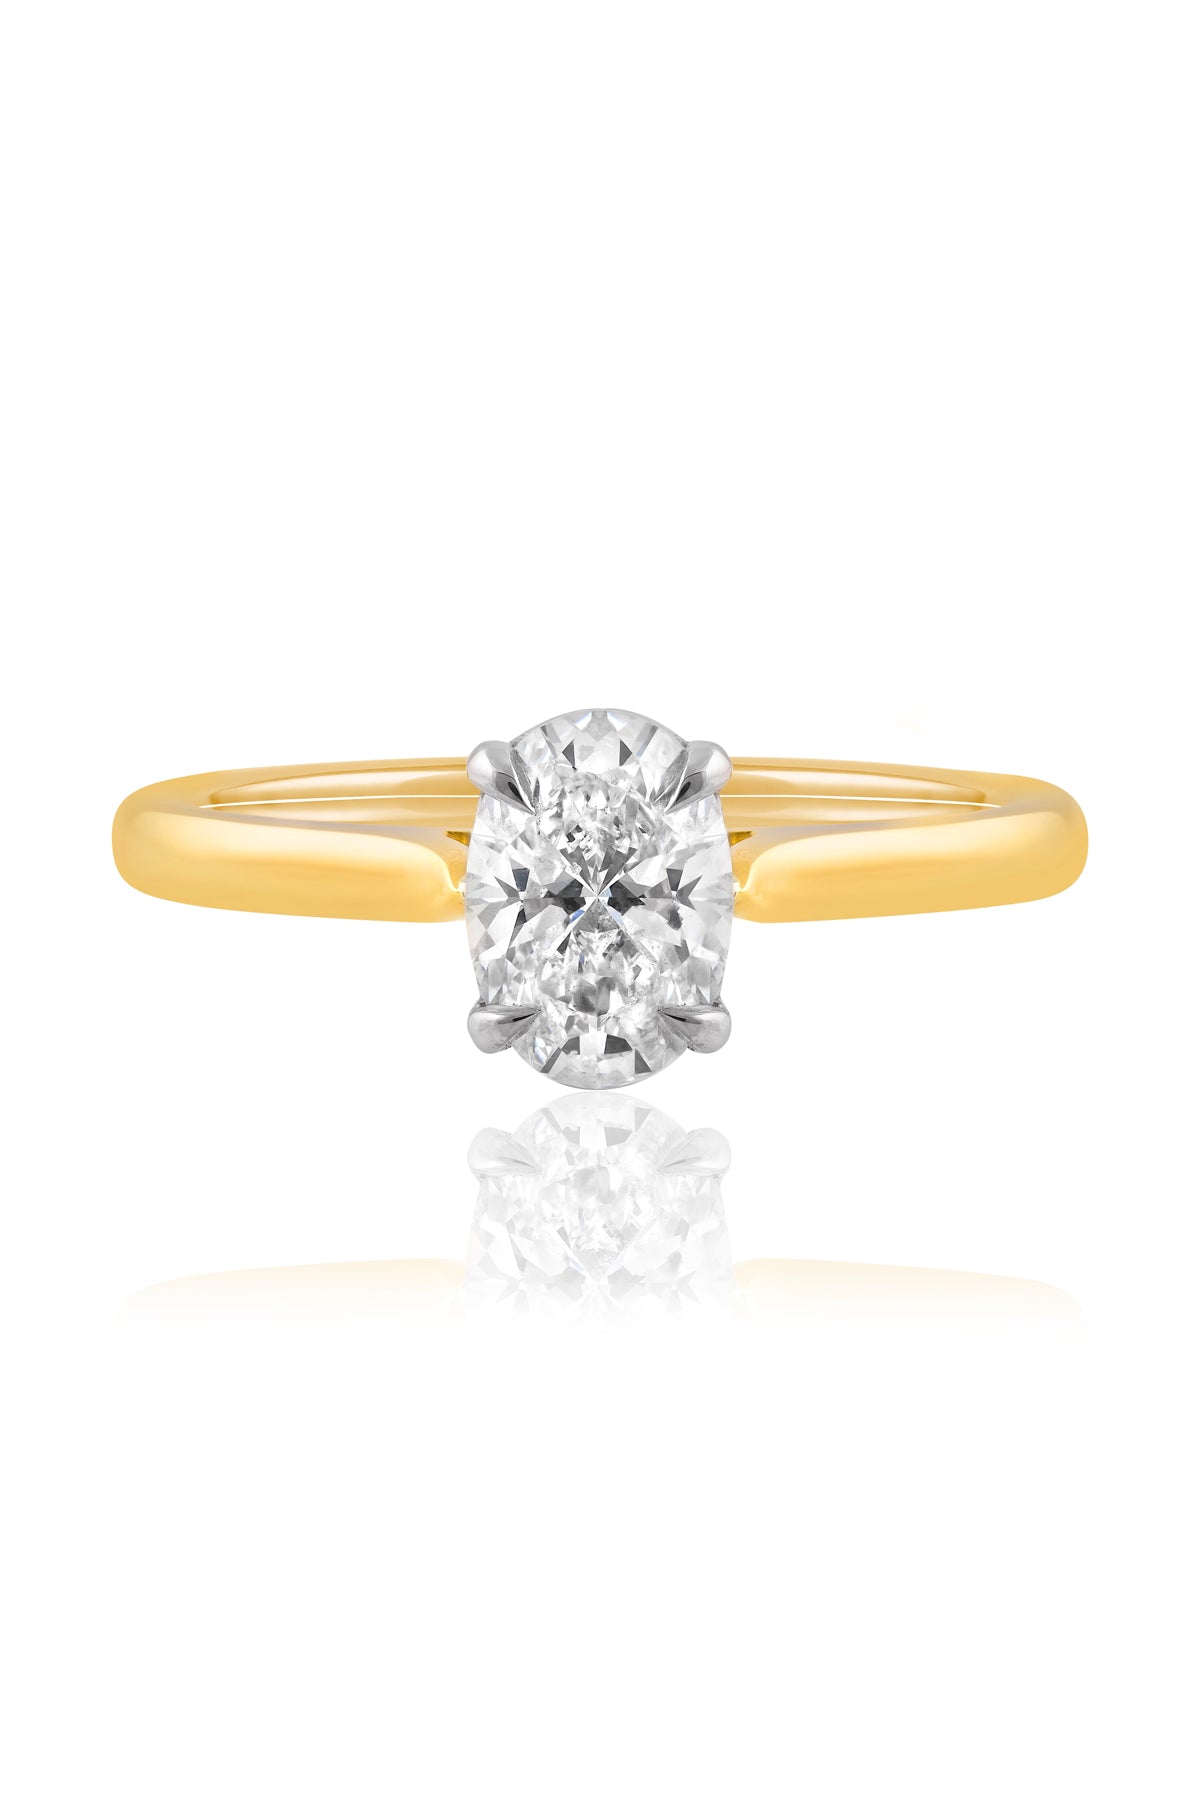 1.01 Carat Oval Diamond Solitaire Engagement Ring from LeGassick Jewellery.